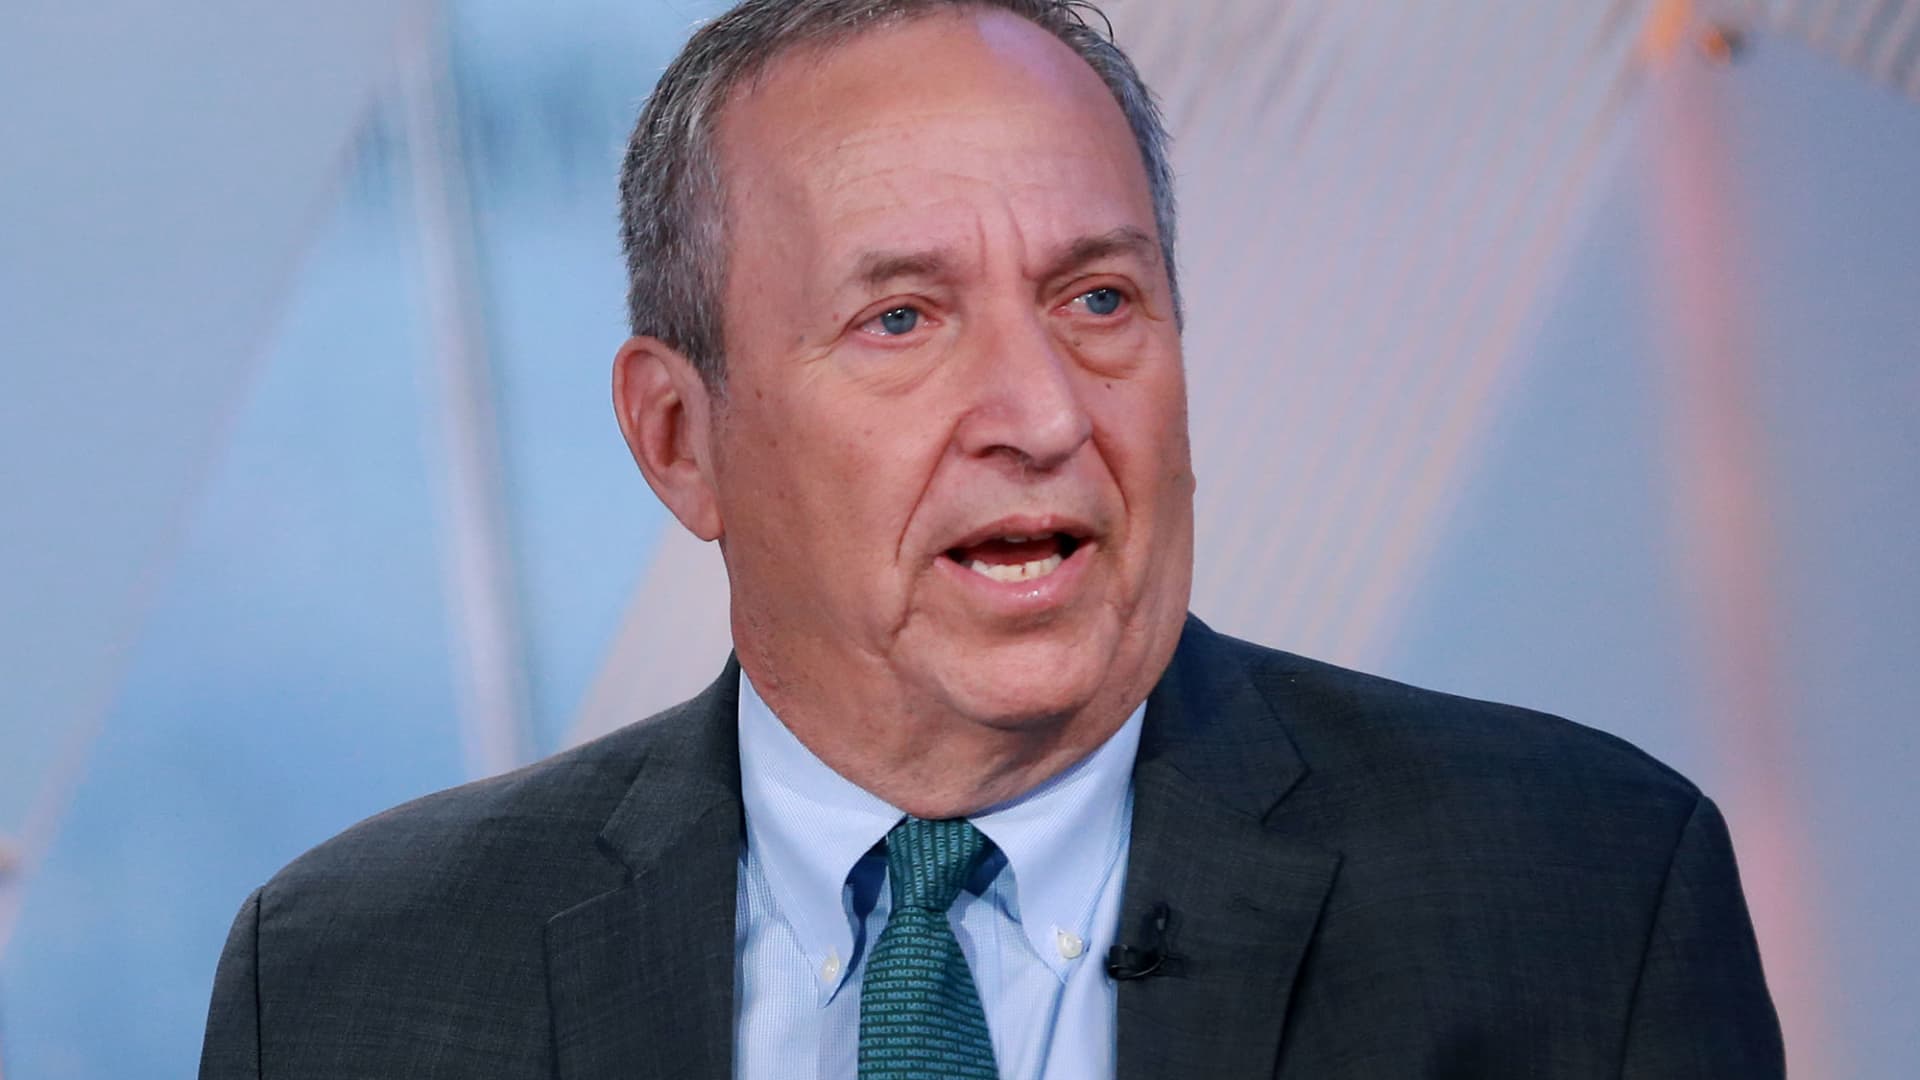 Larry Summers blasts UK tax cuts as ‘utterly irresponsible’ and warns of possible contagion – CNBC